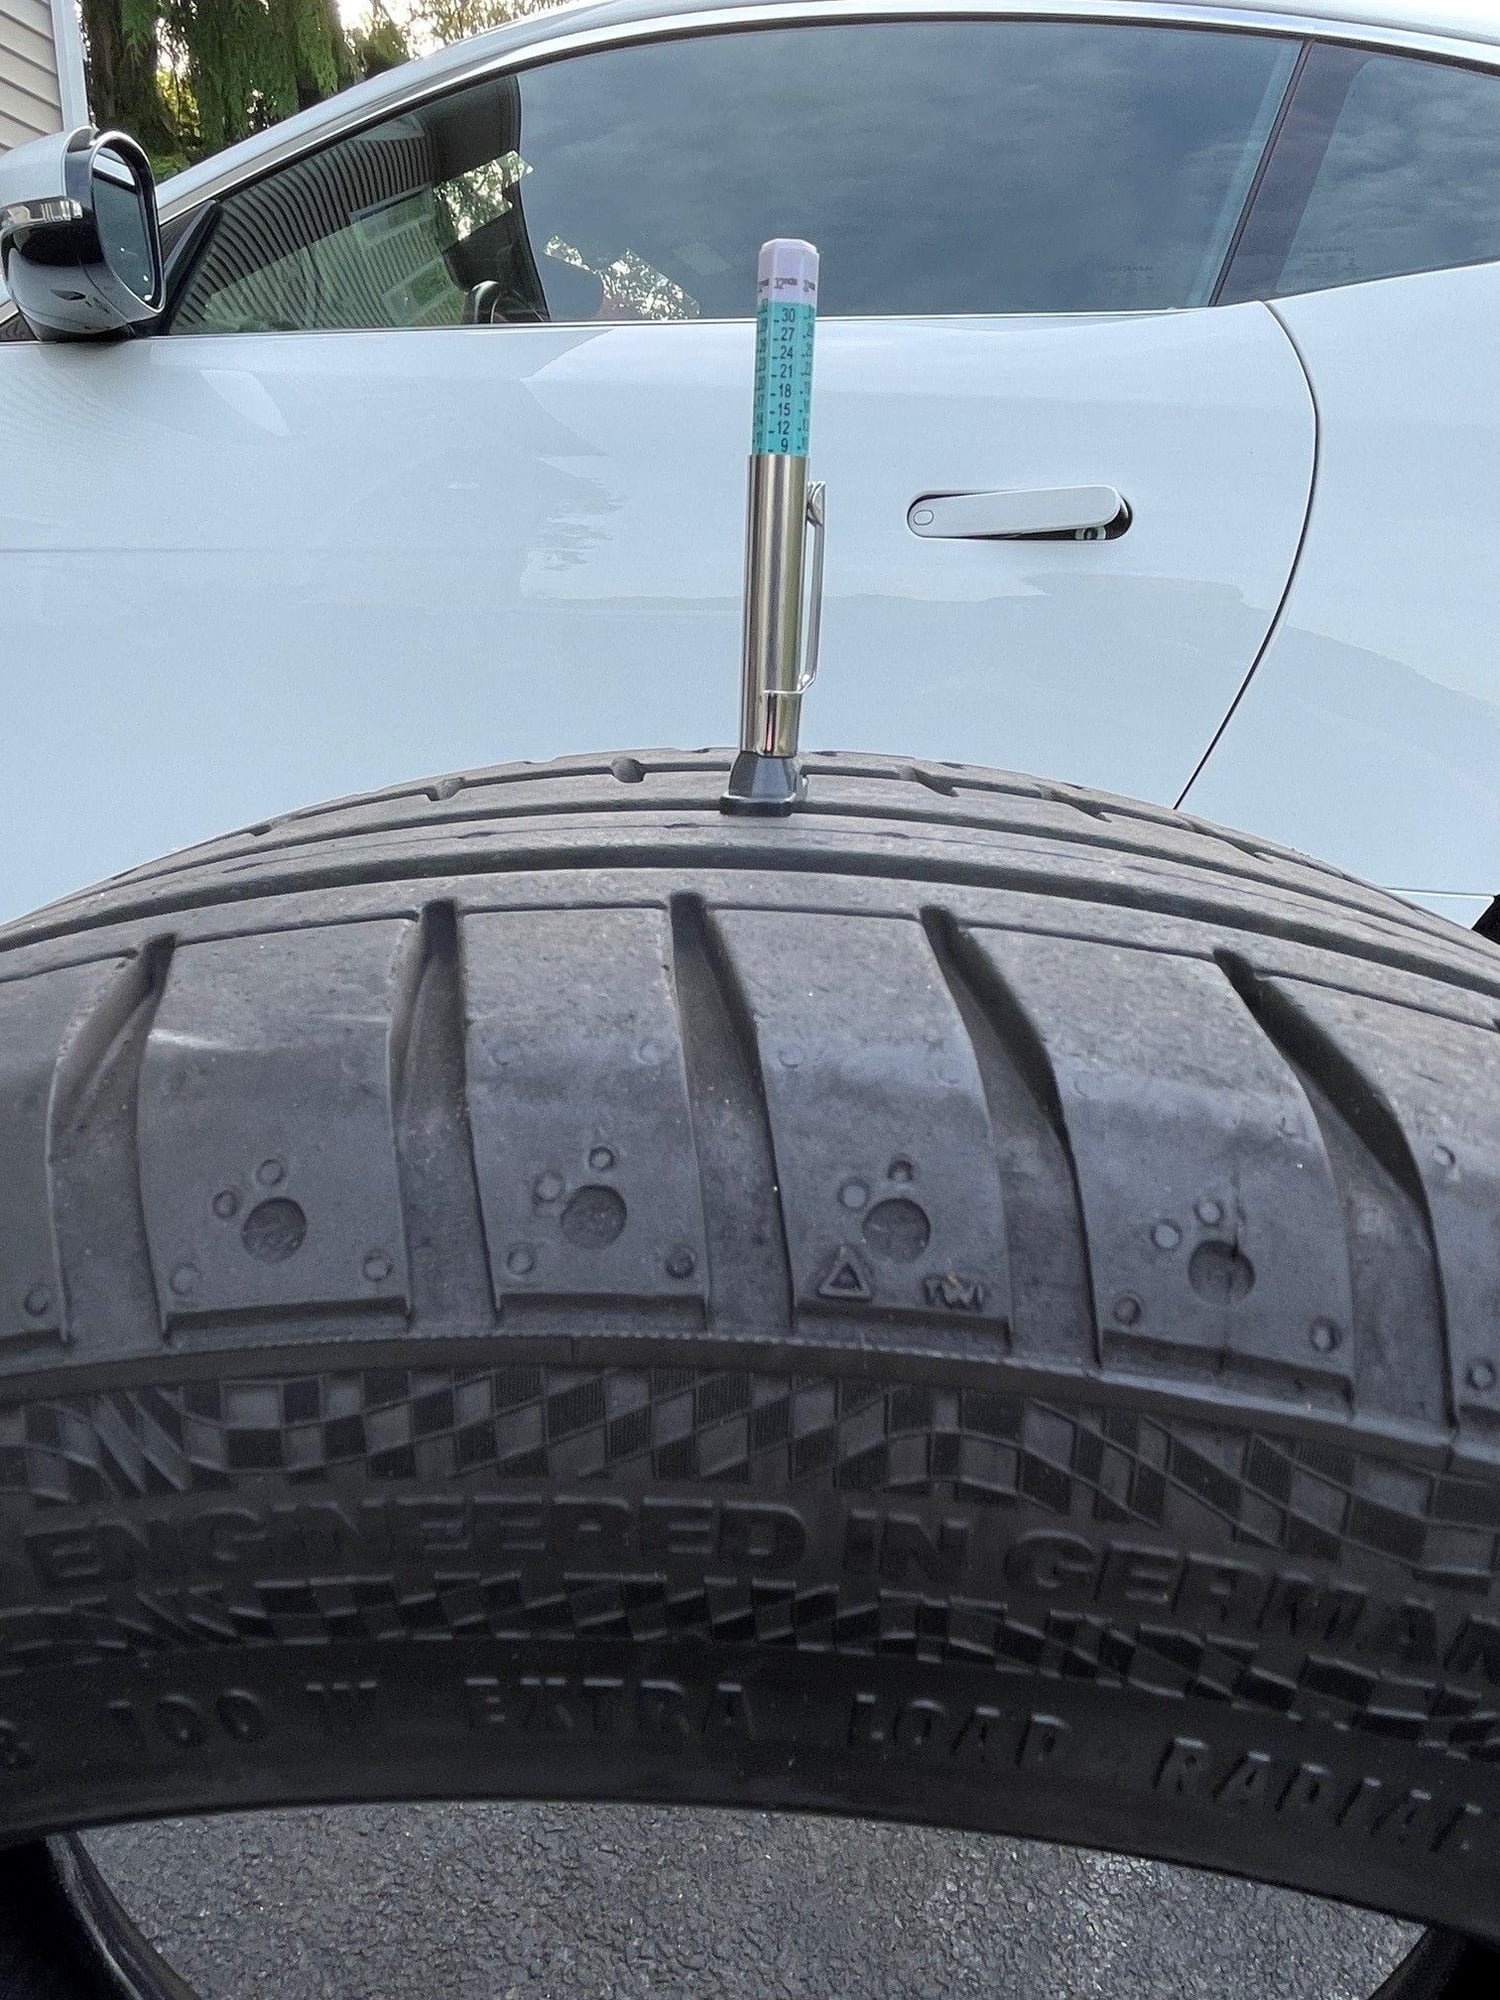 Wheels and Tires/Axles - Four Continental SportContact 2 Performance Tires 18" with only 2,900 miles - Used - 2018 Jaguar F-Type - New City, NY 10956, United States